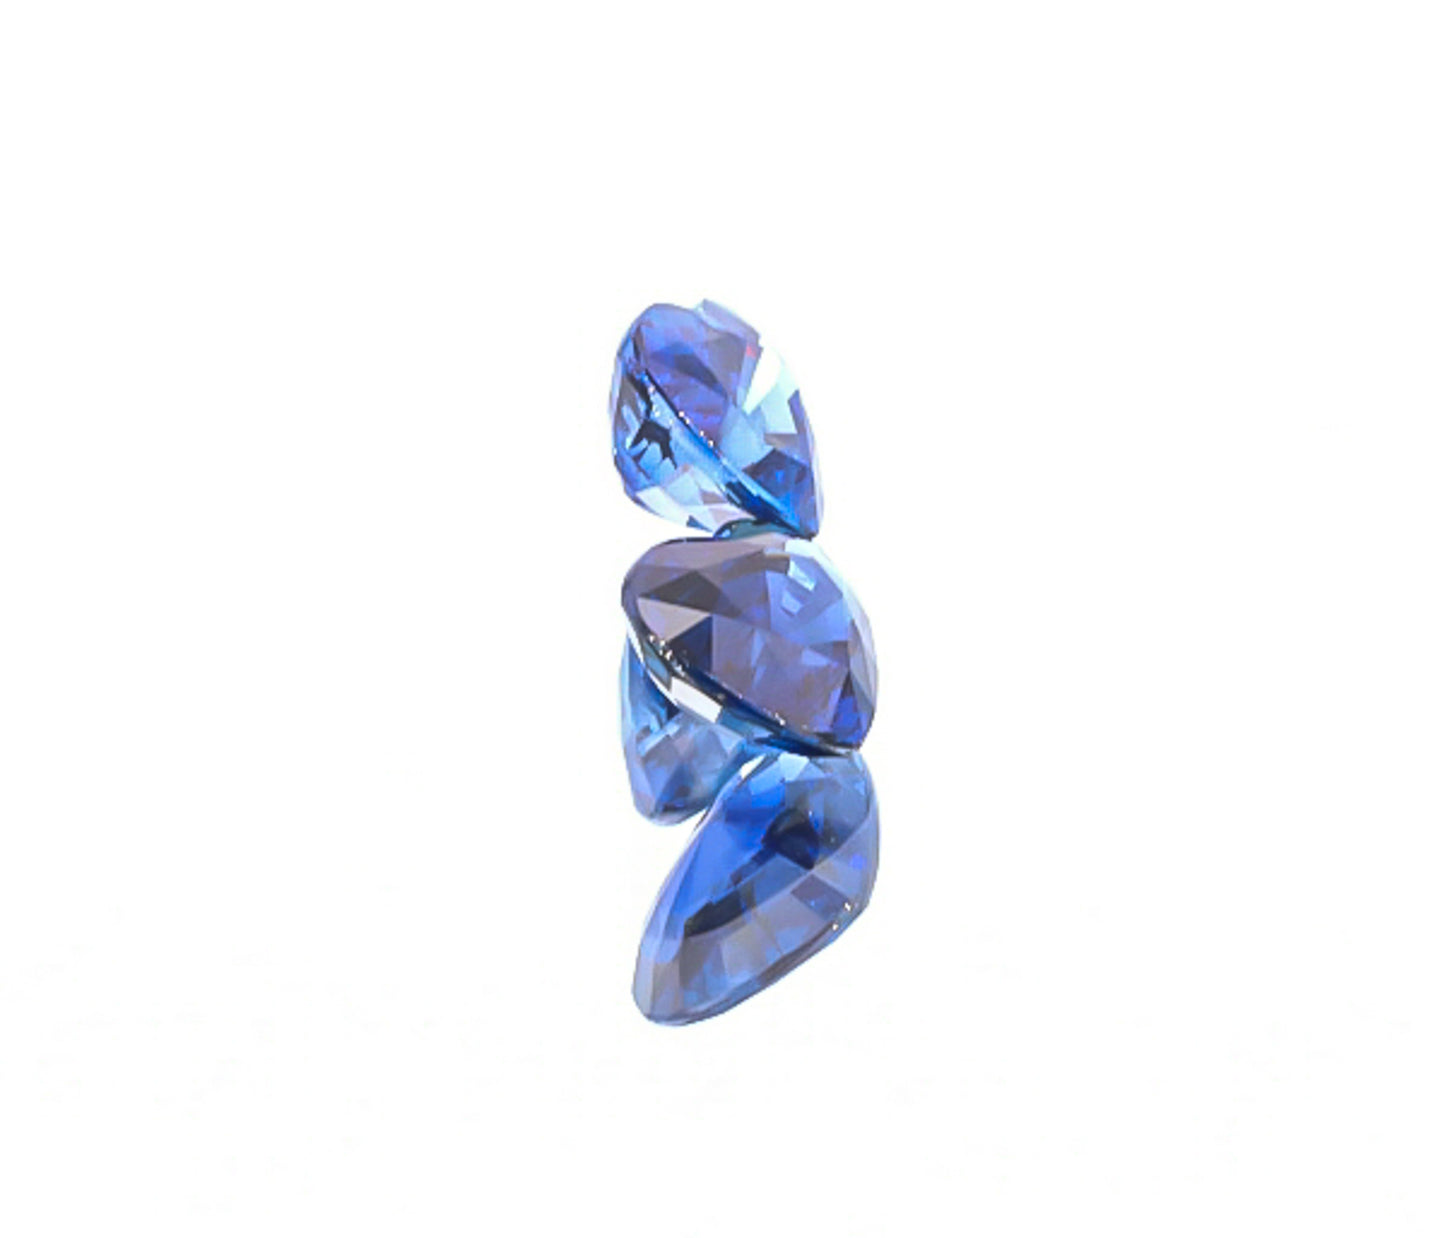 Load image into Gallery viewer, Natural Blue Sapphire Pair Heart Shape 4.03 Total Carat Weight With GIA Report
